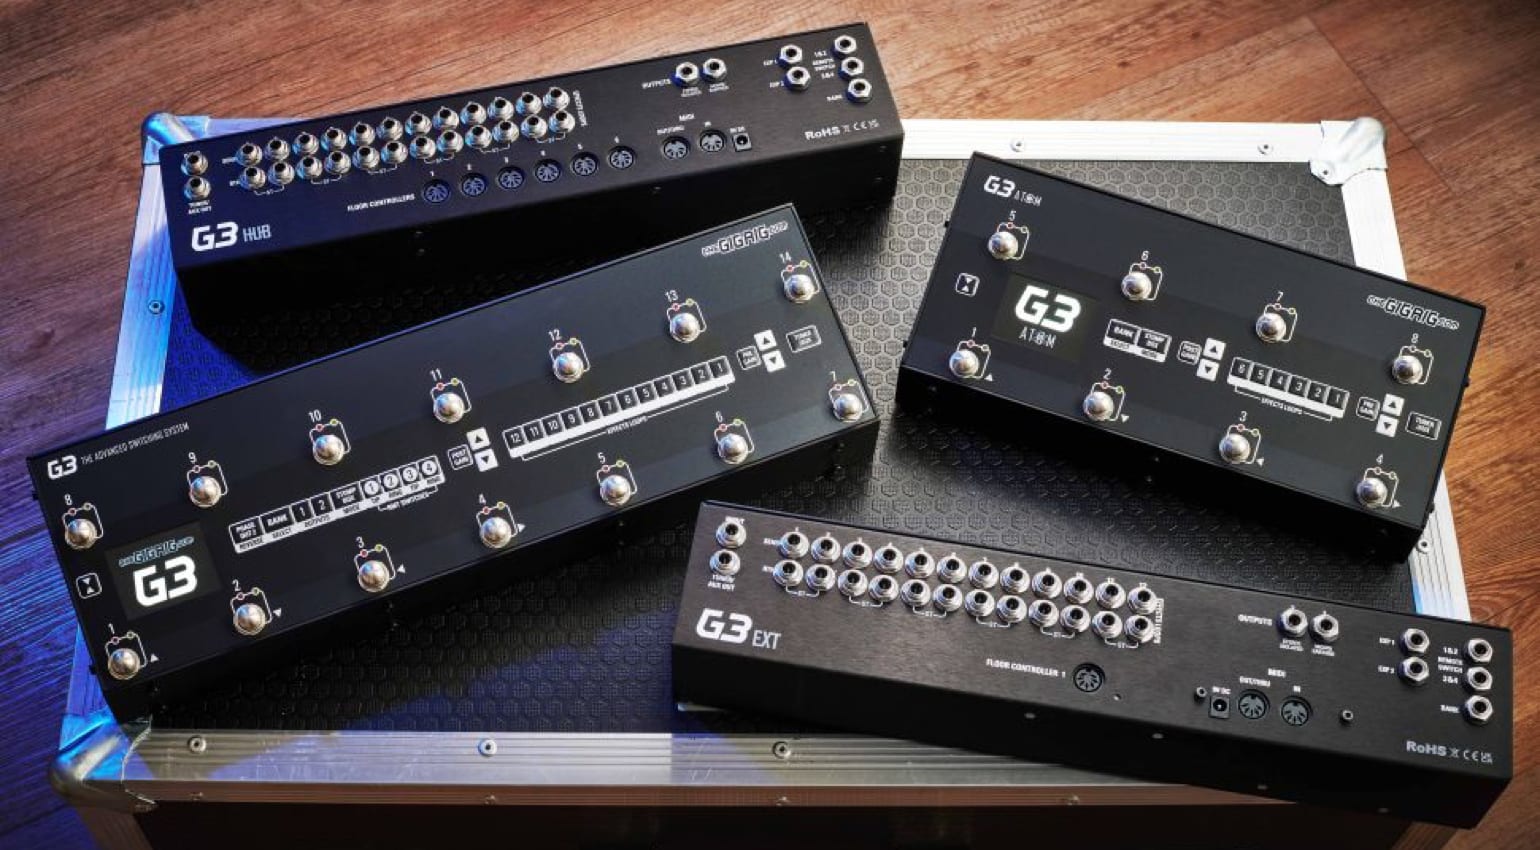 GigRig G3 pedal switching system: The ultimate stompbox control? - gearnews...